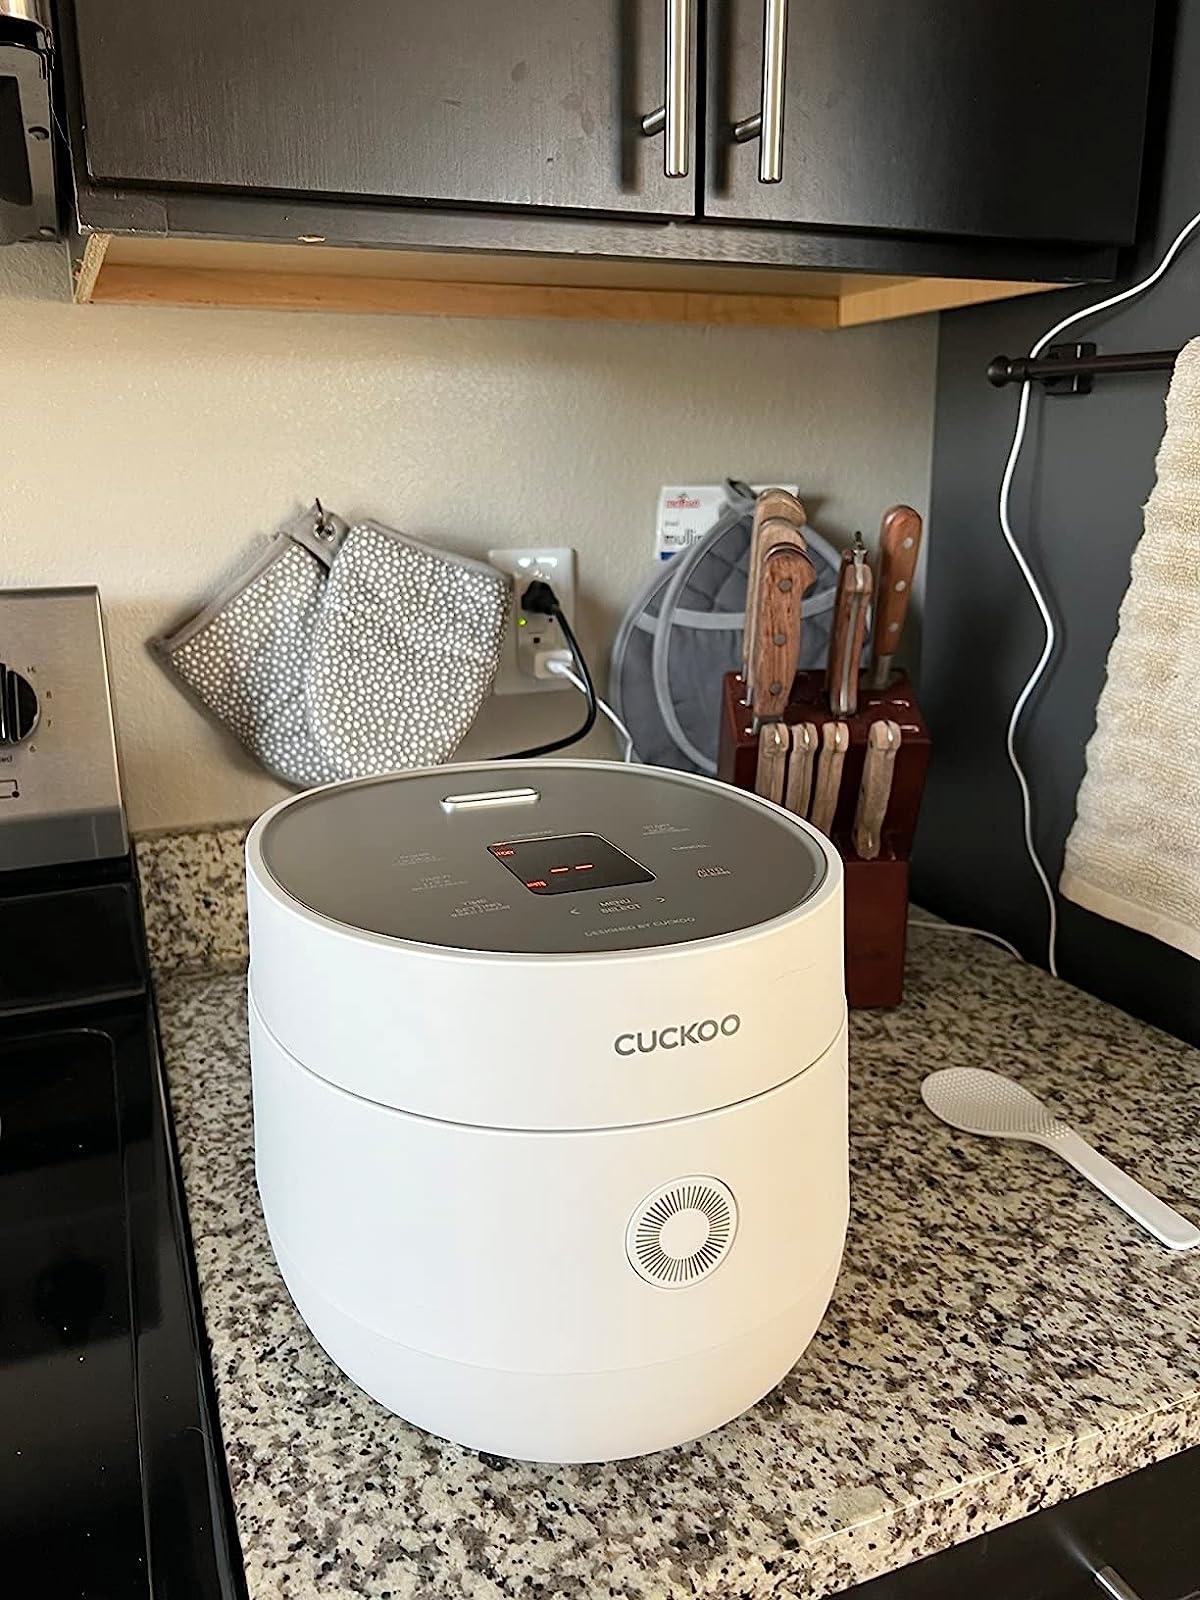 the rice cooker in white on a reviewer's countertop